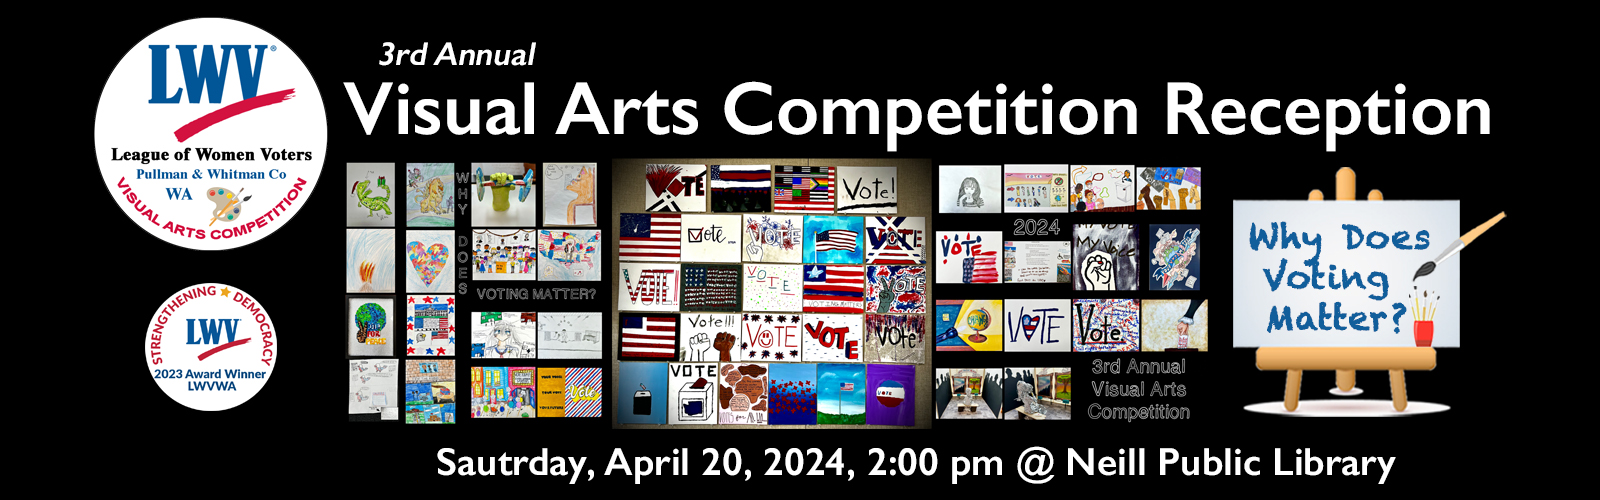 Banner poster of invite to visual arts competition artists reception on April 20 at 2:00 pm at Neill Public Library the title of why does voting matter.  Student artwork forms a rectangle in the middle of the banner with an art easle on the with the theme whiy does voting matter.